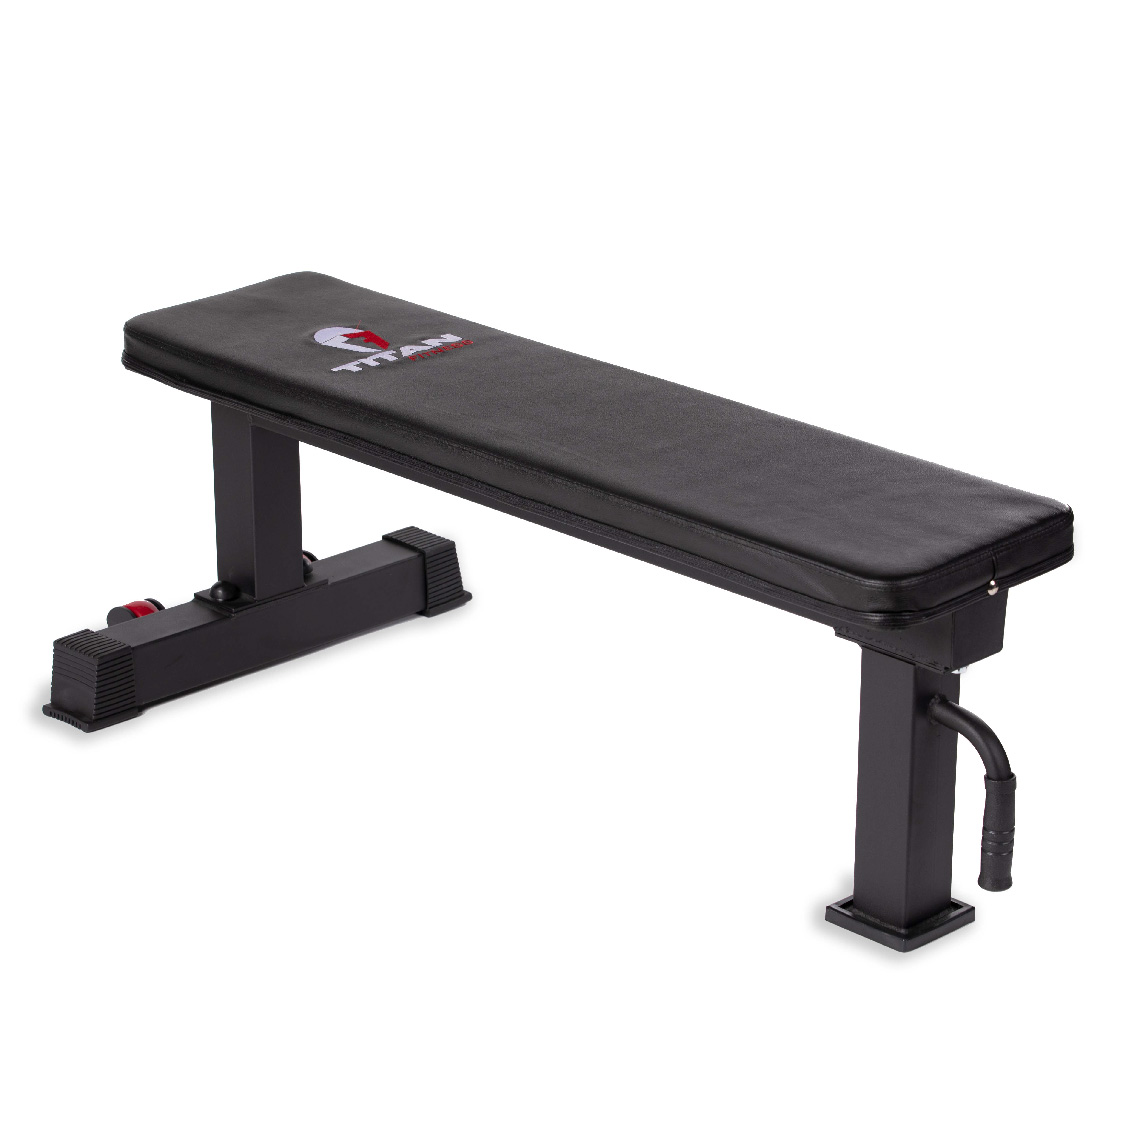 COMPETITION FLAT BENCH